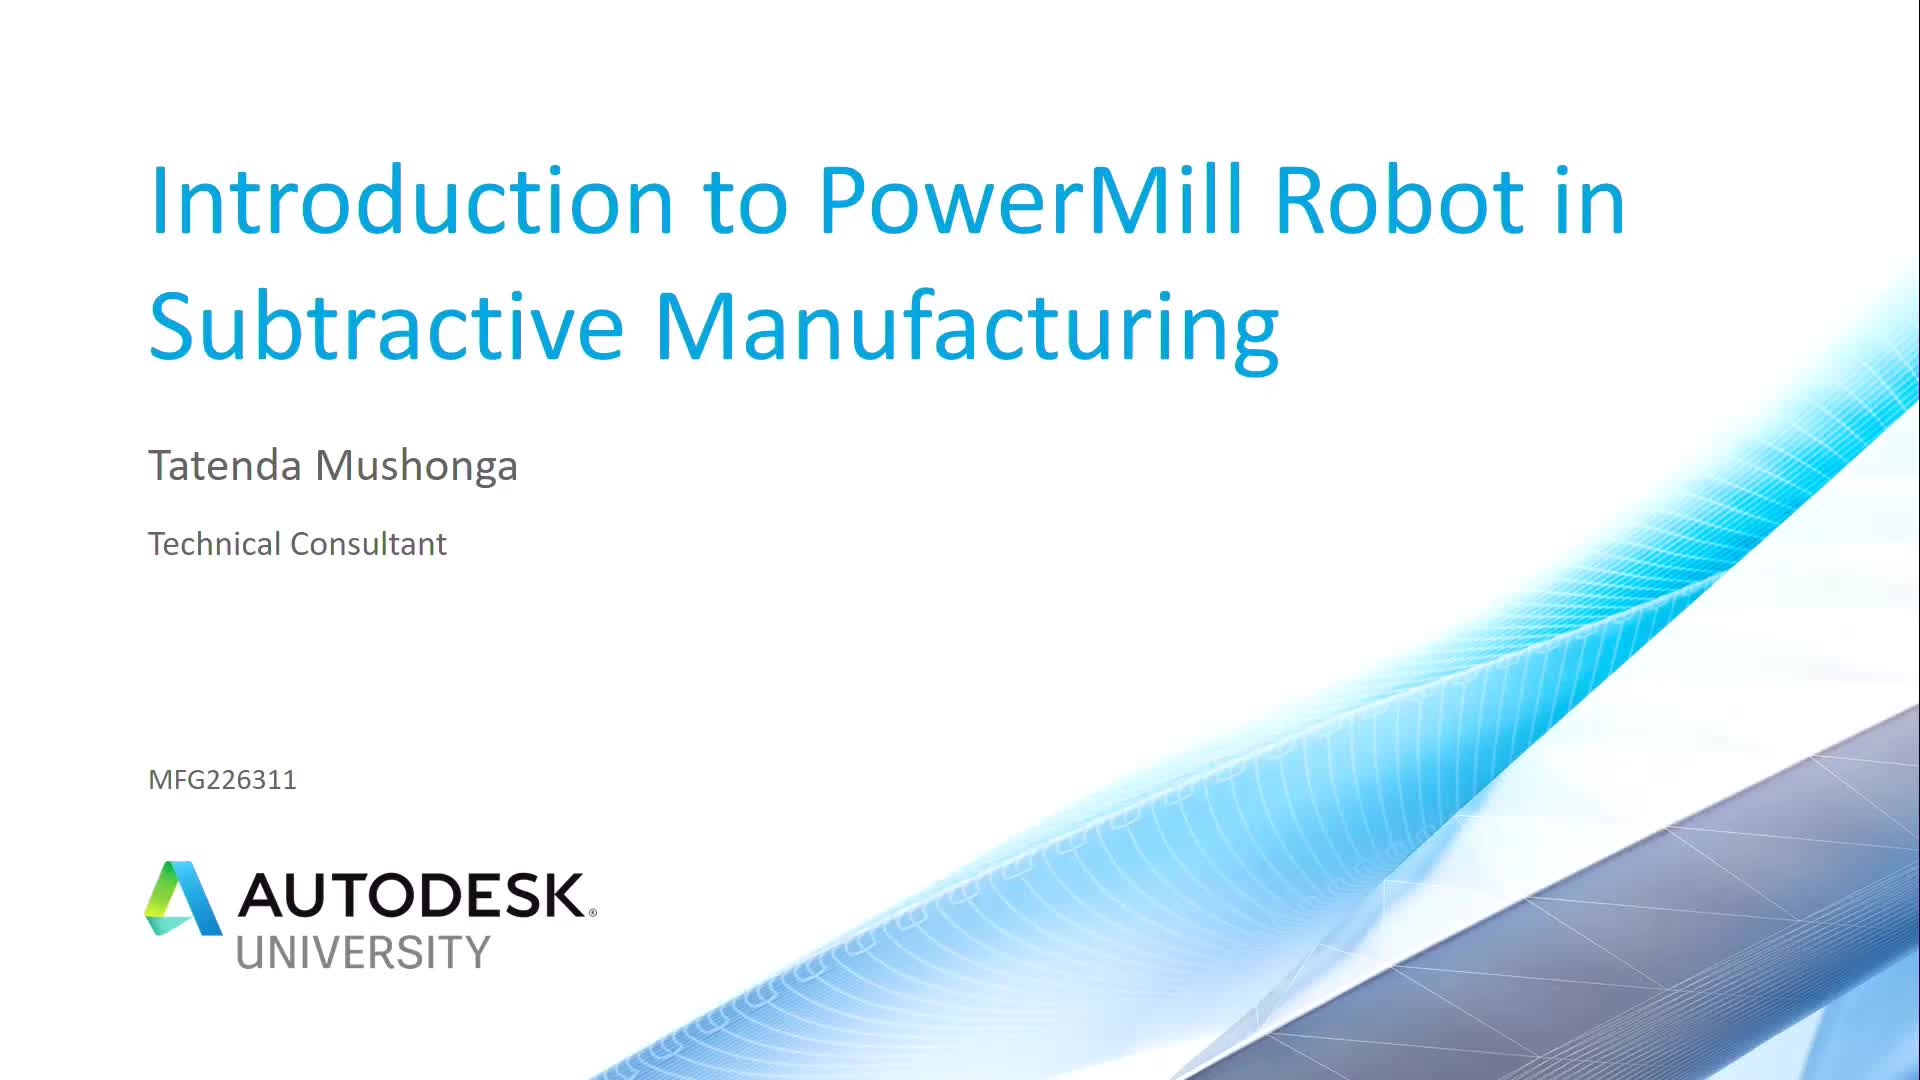 Abb robots subtractive manufacturing company